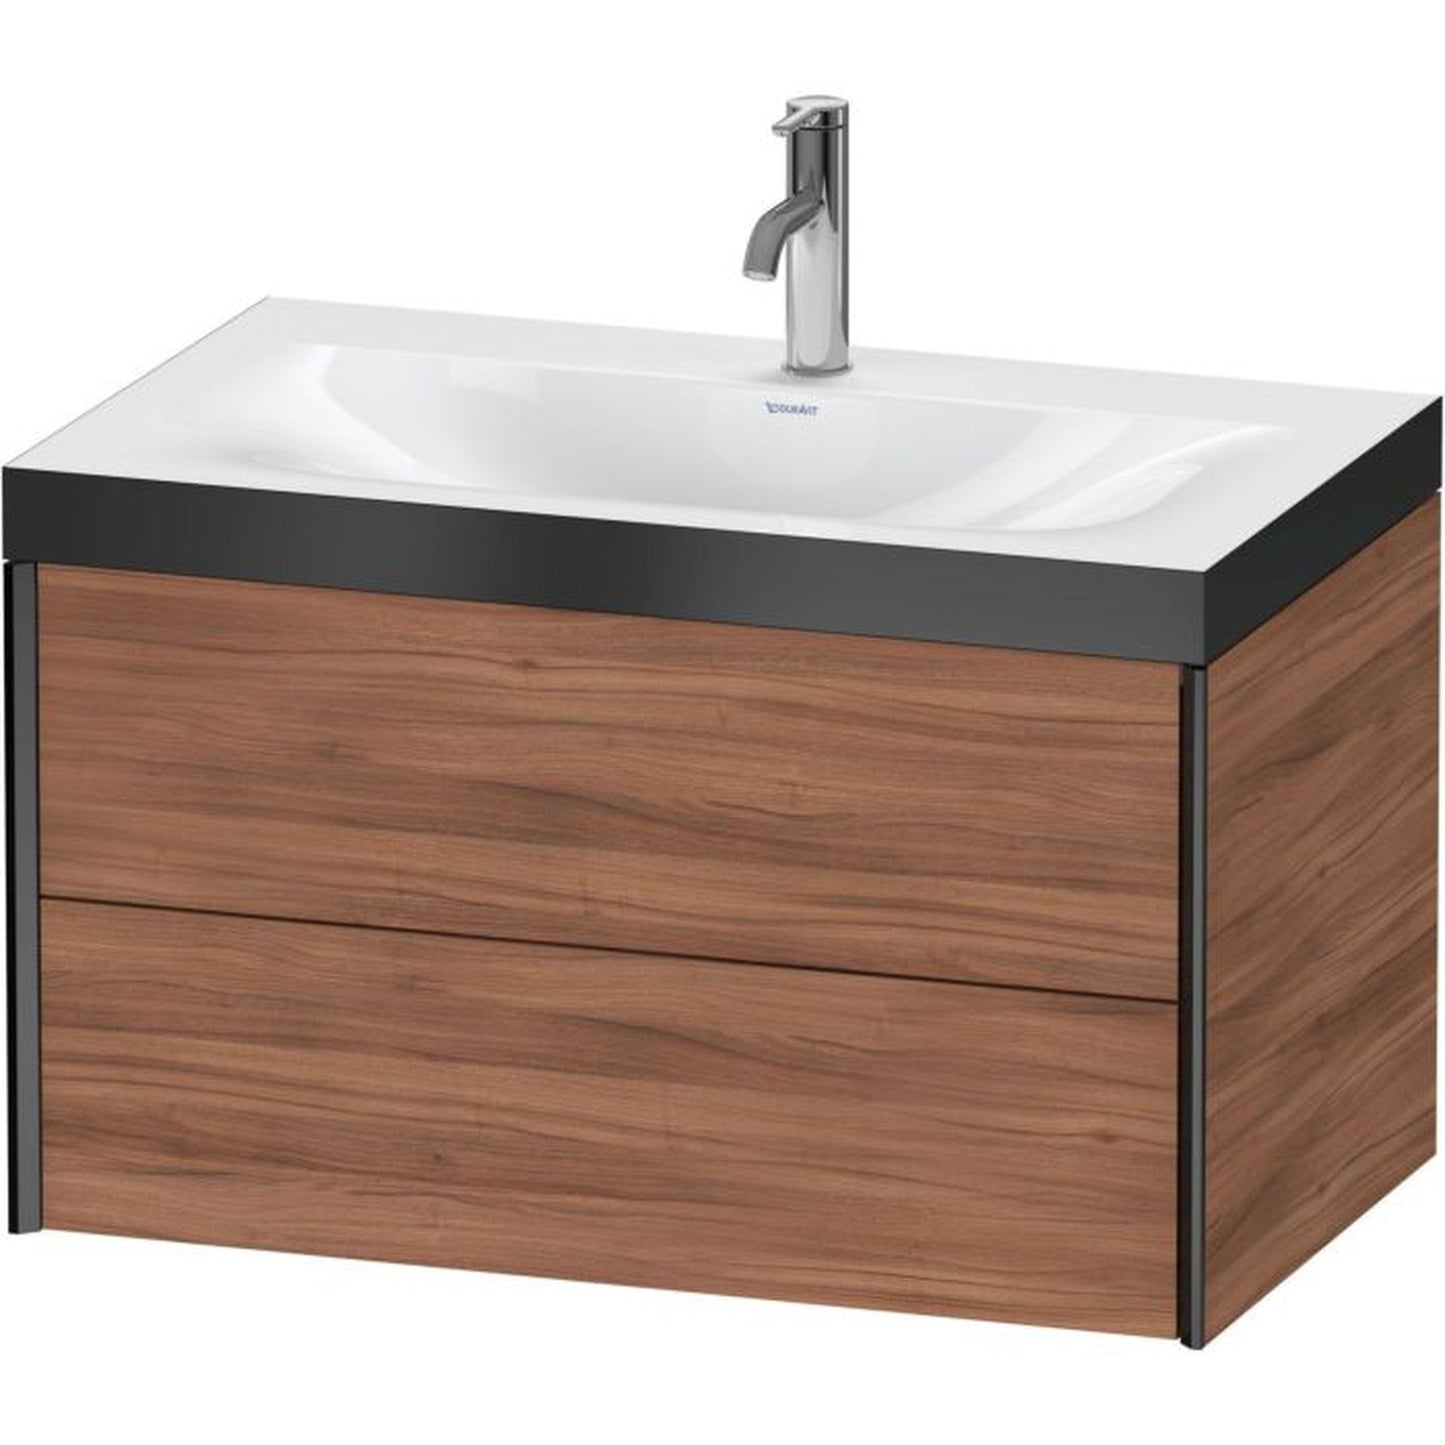 Duravit Xviu 31" x 20" x 19" Two Drawer C-Bonded Wall-Mount Vanity Kit With One Tap Hole, Walnut (XV4615OB279P)